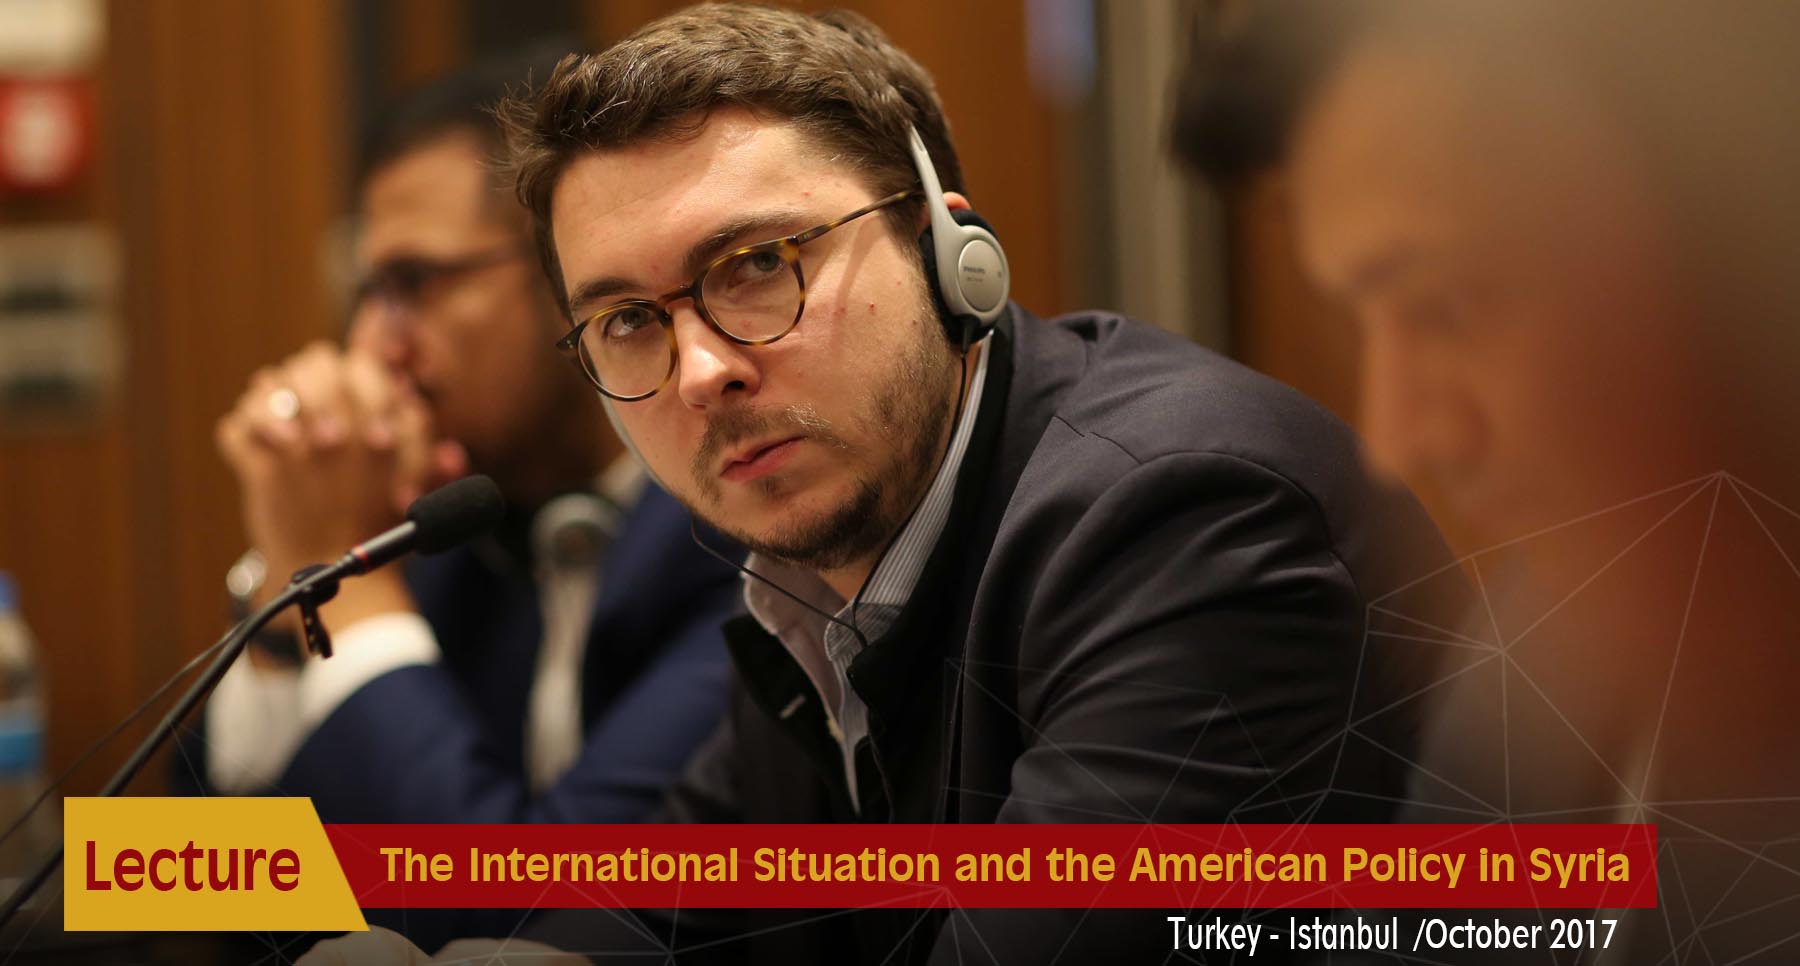 The International Situation and the American Policy in Syria